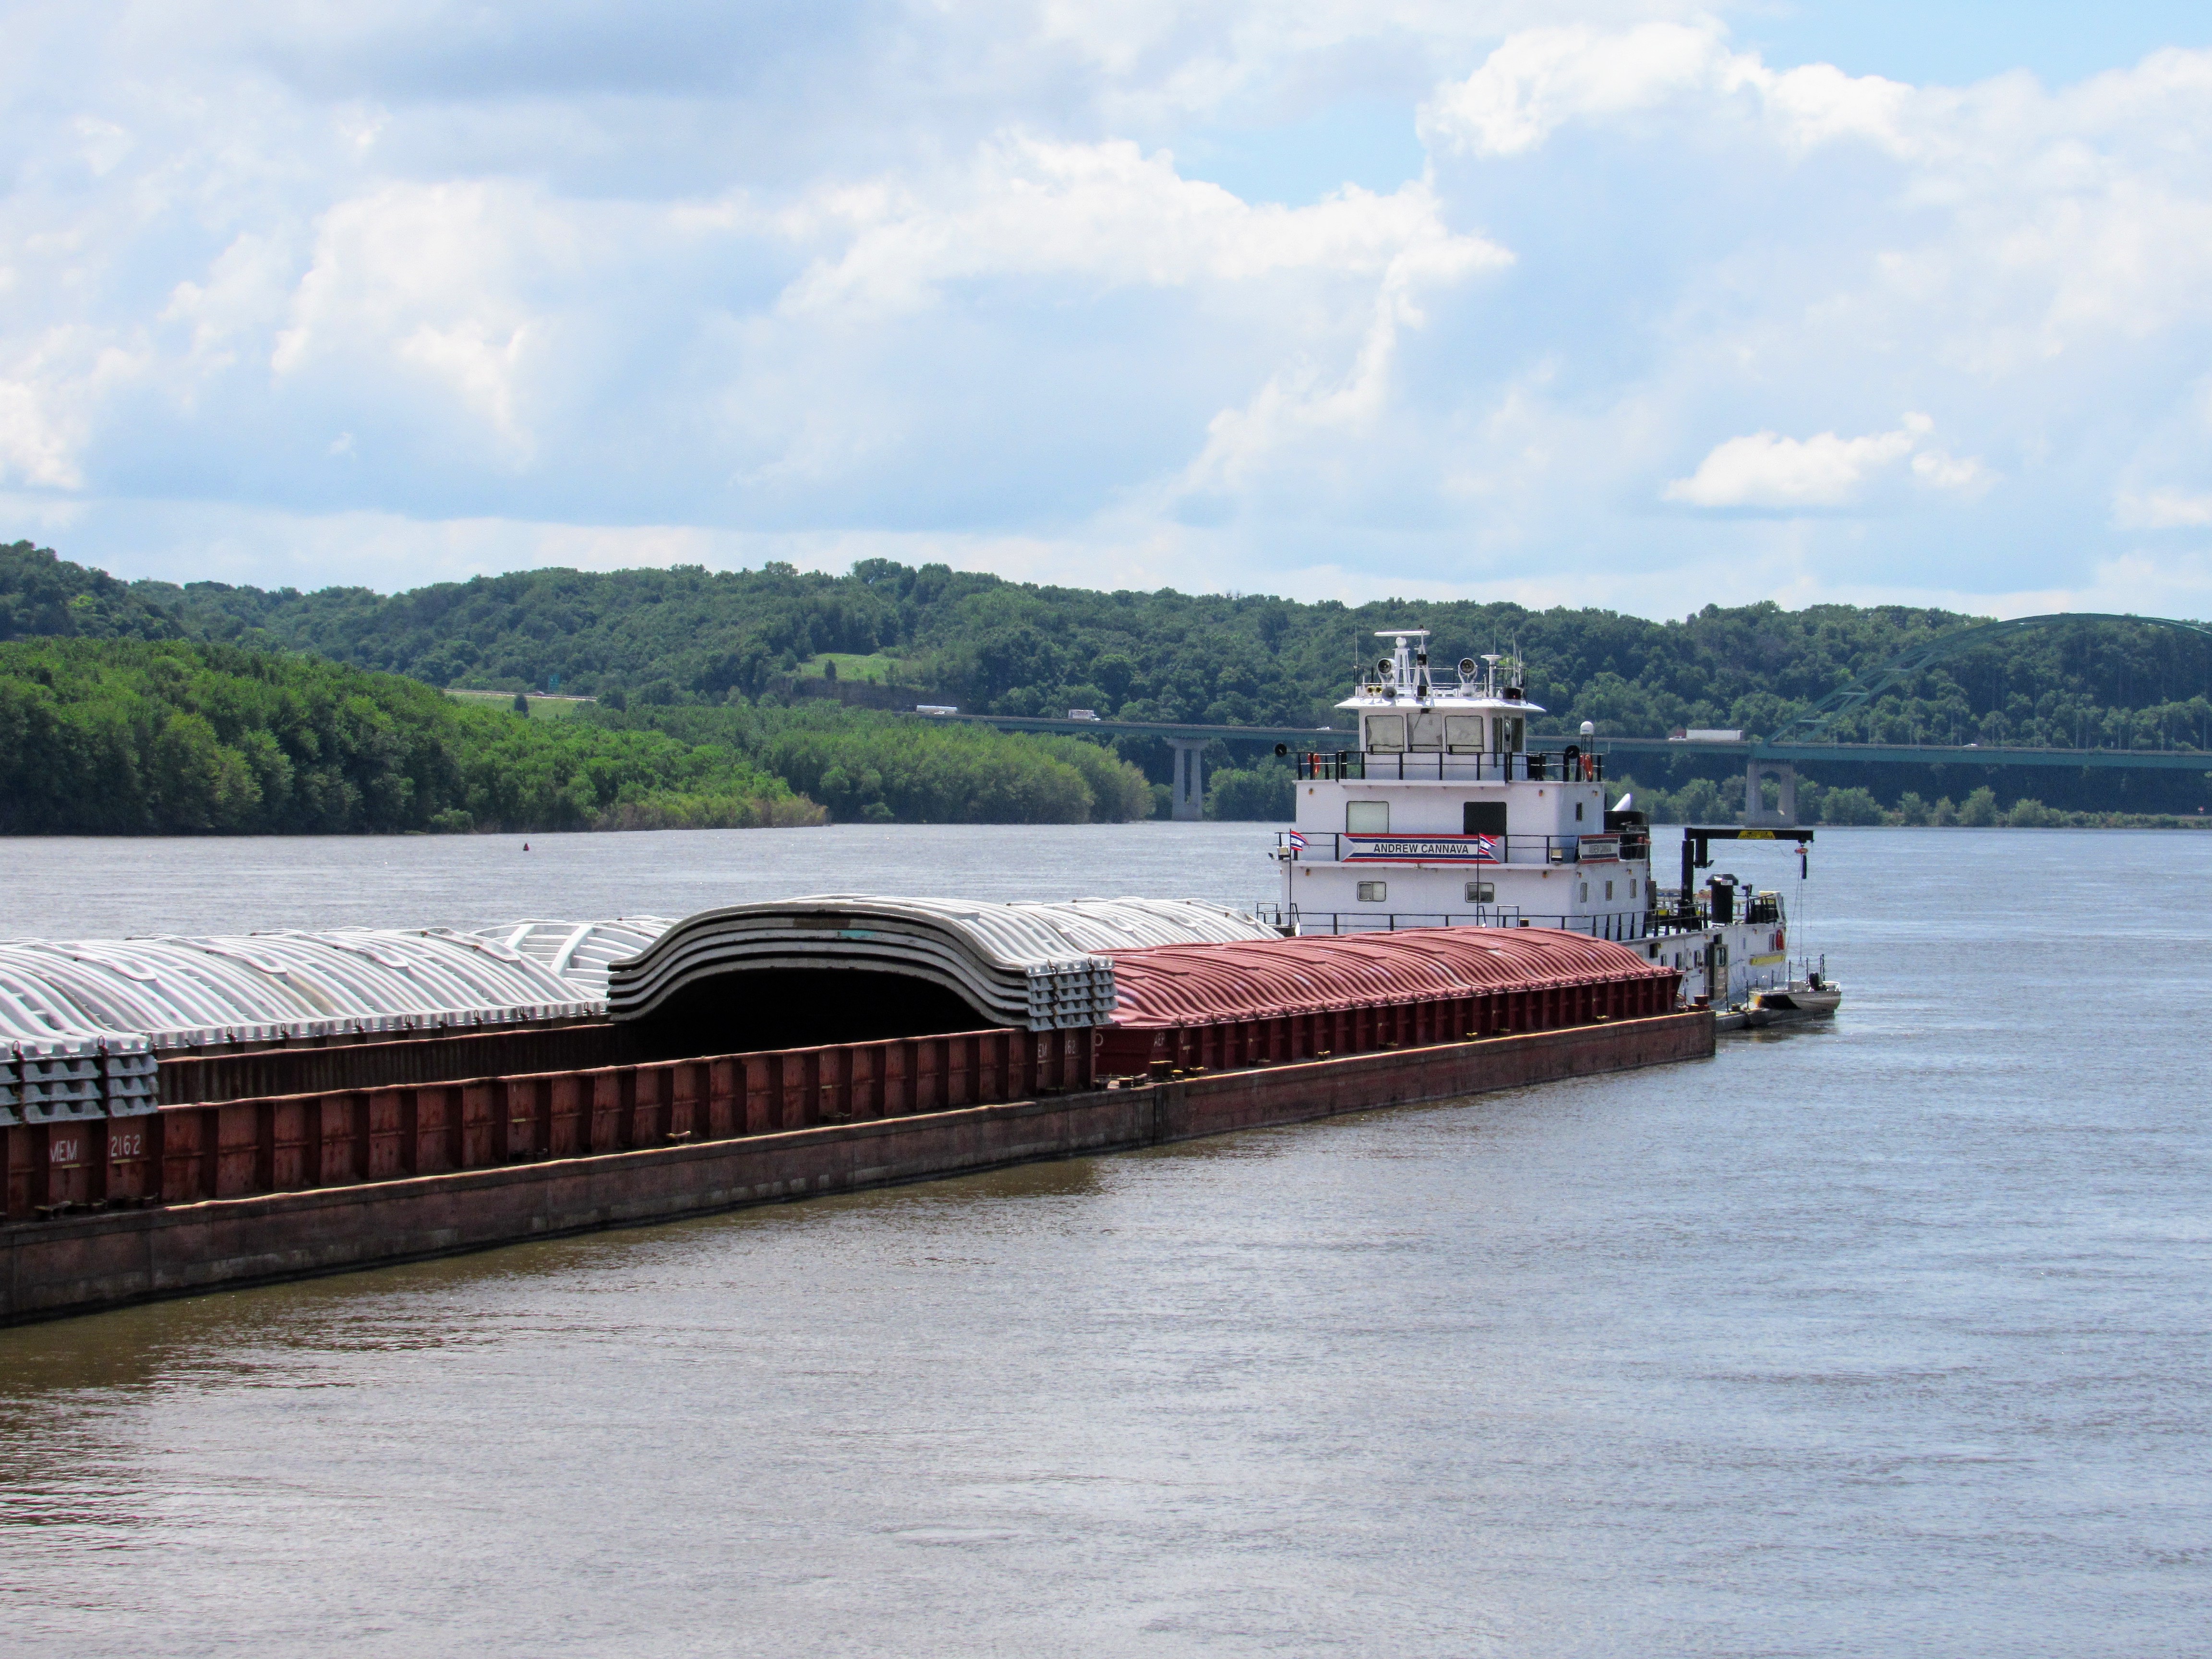 A tow headed north on the Mississippi River, just south of Lock and Dam #11 in Dubuque, Iowa. (Avery Gregurich)